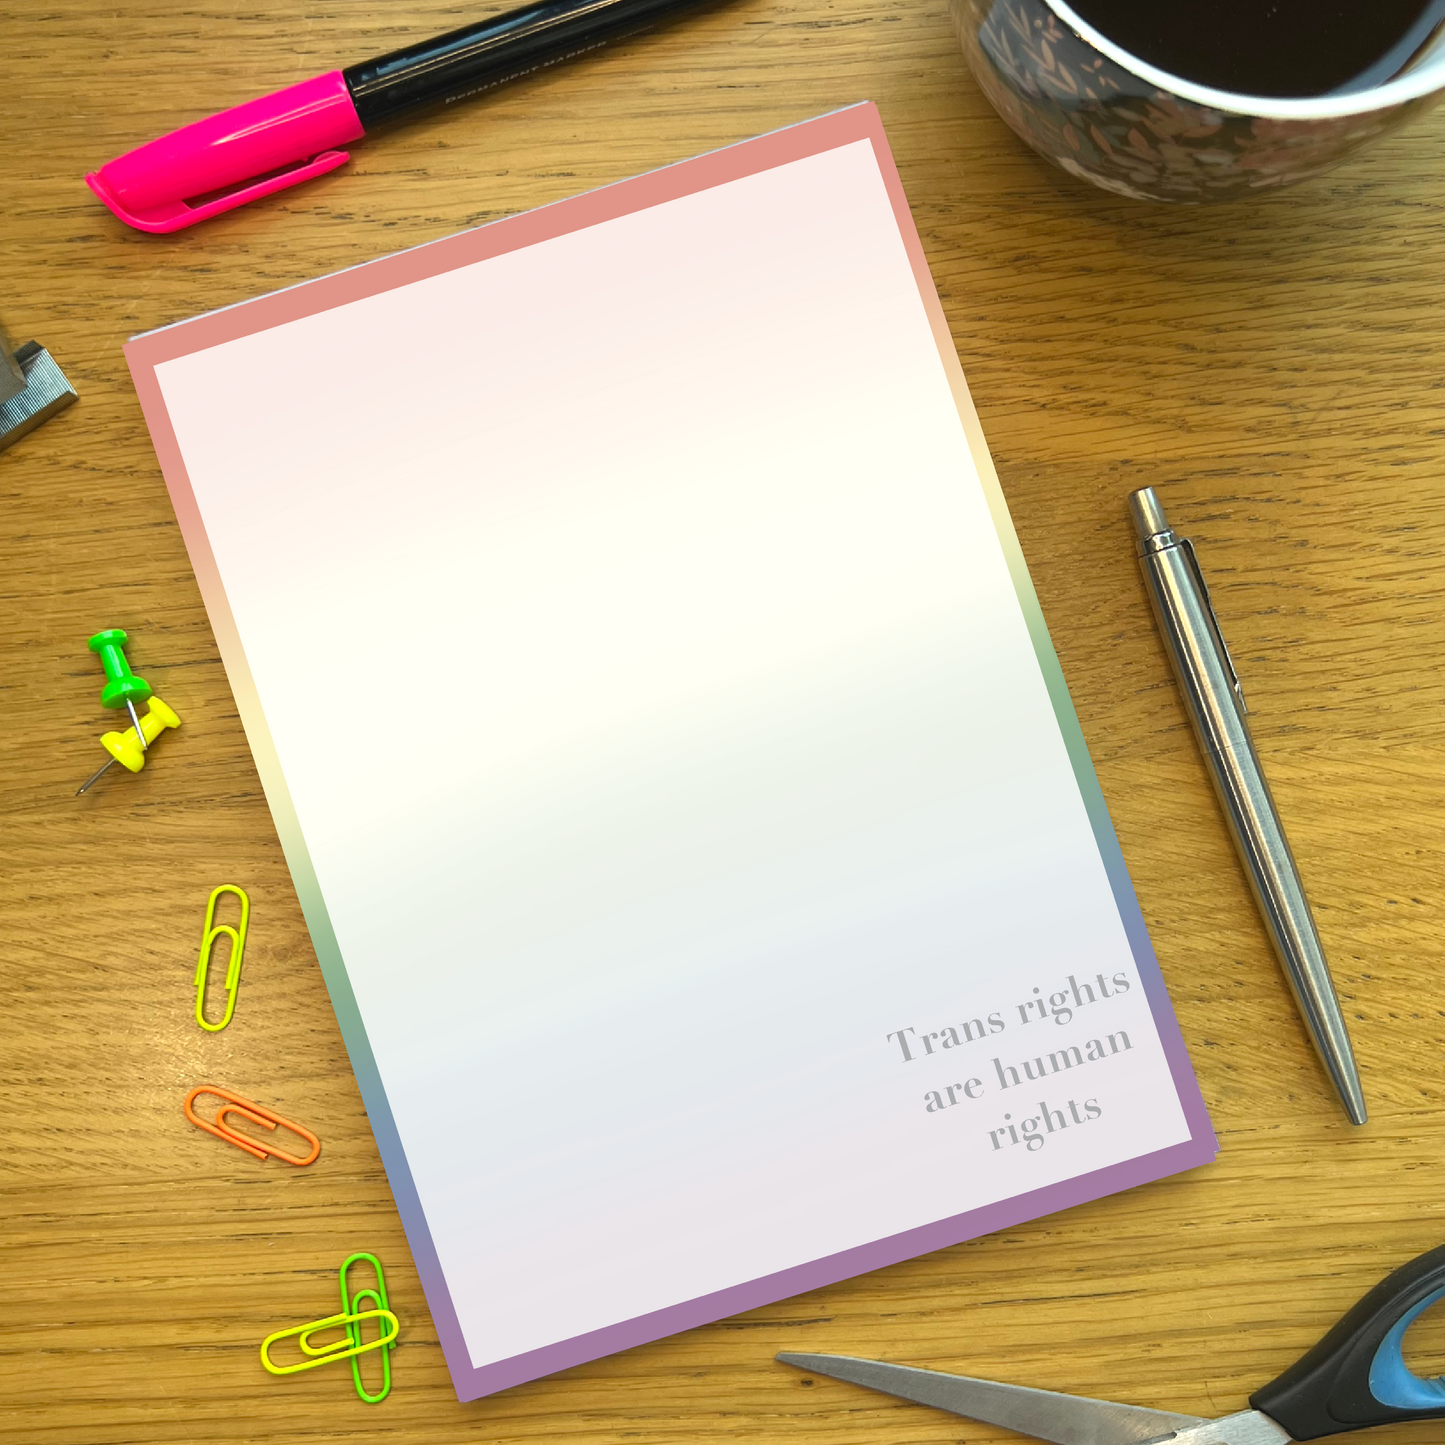 Rainbow pride notepad with quote Trans rights are human rights, on a wooden desk with stationery